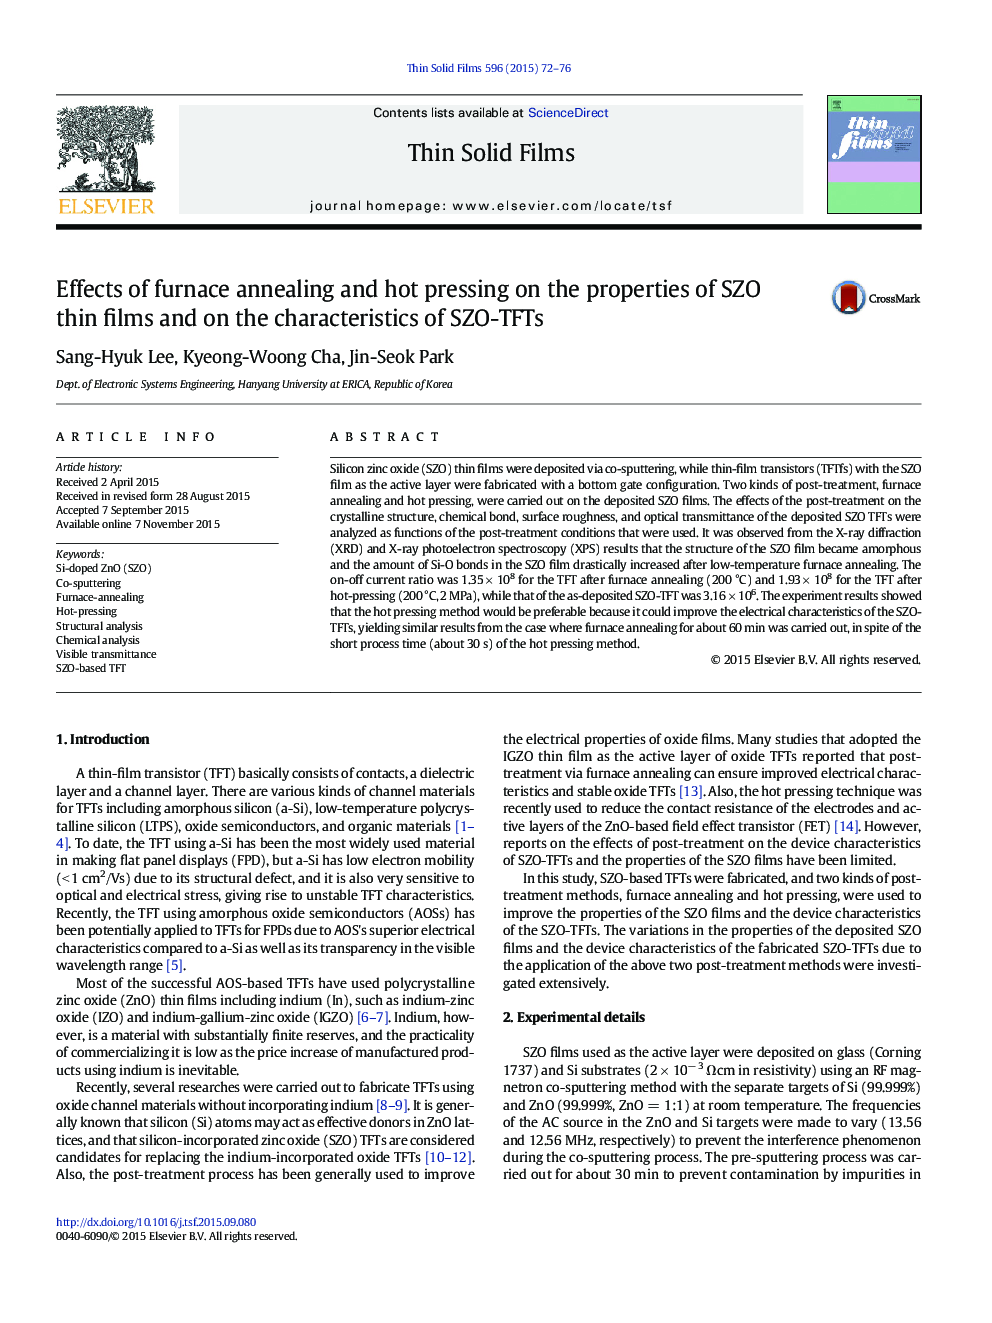 Effects of furnace annealing and hot pressing on the properties of SZO thin films and on the characteristics of SZO-TFTs